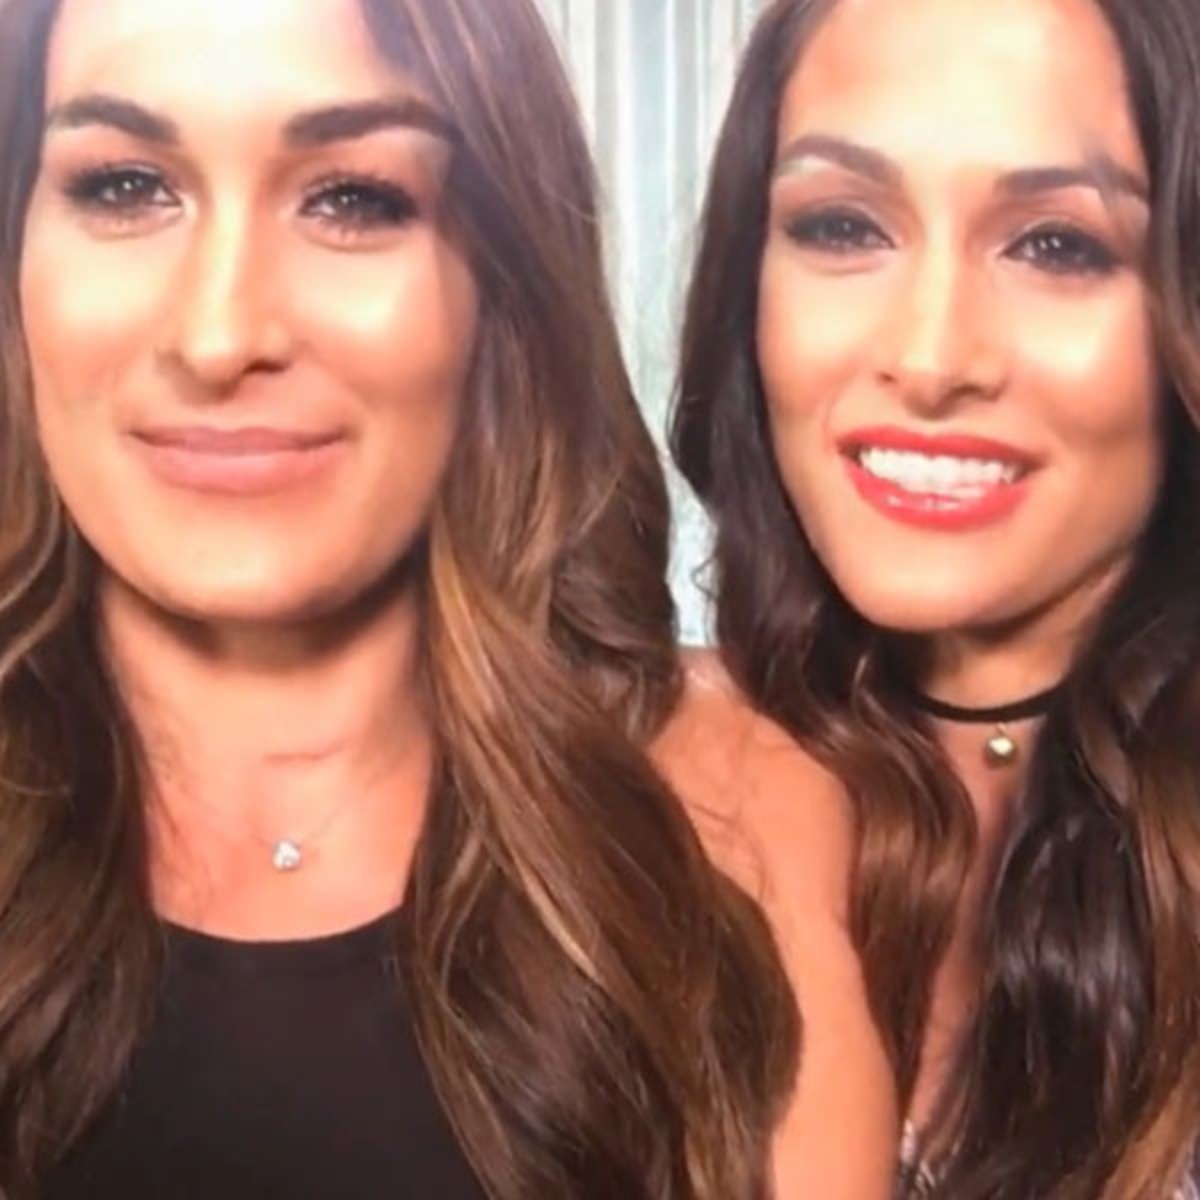 What is brie bella snapchat